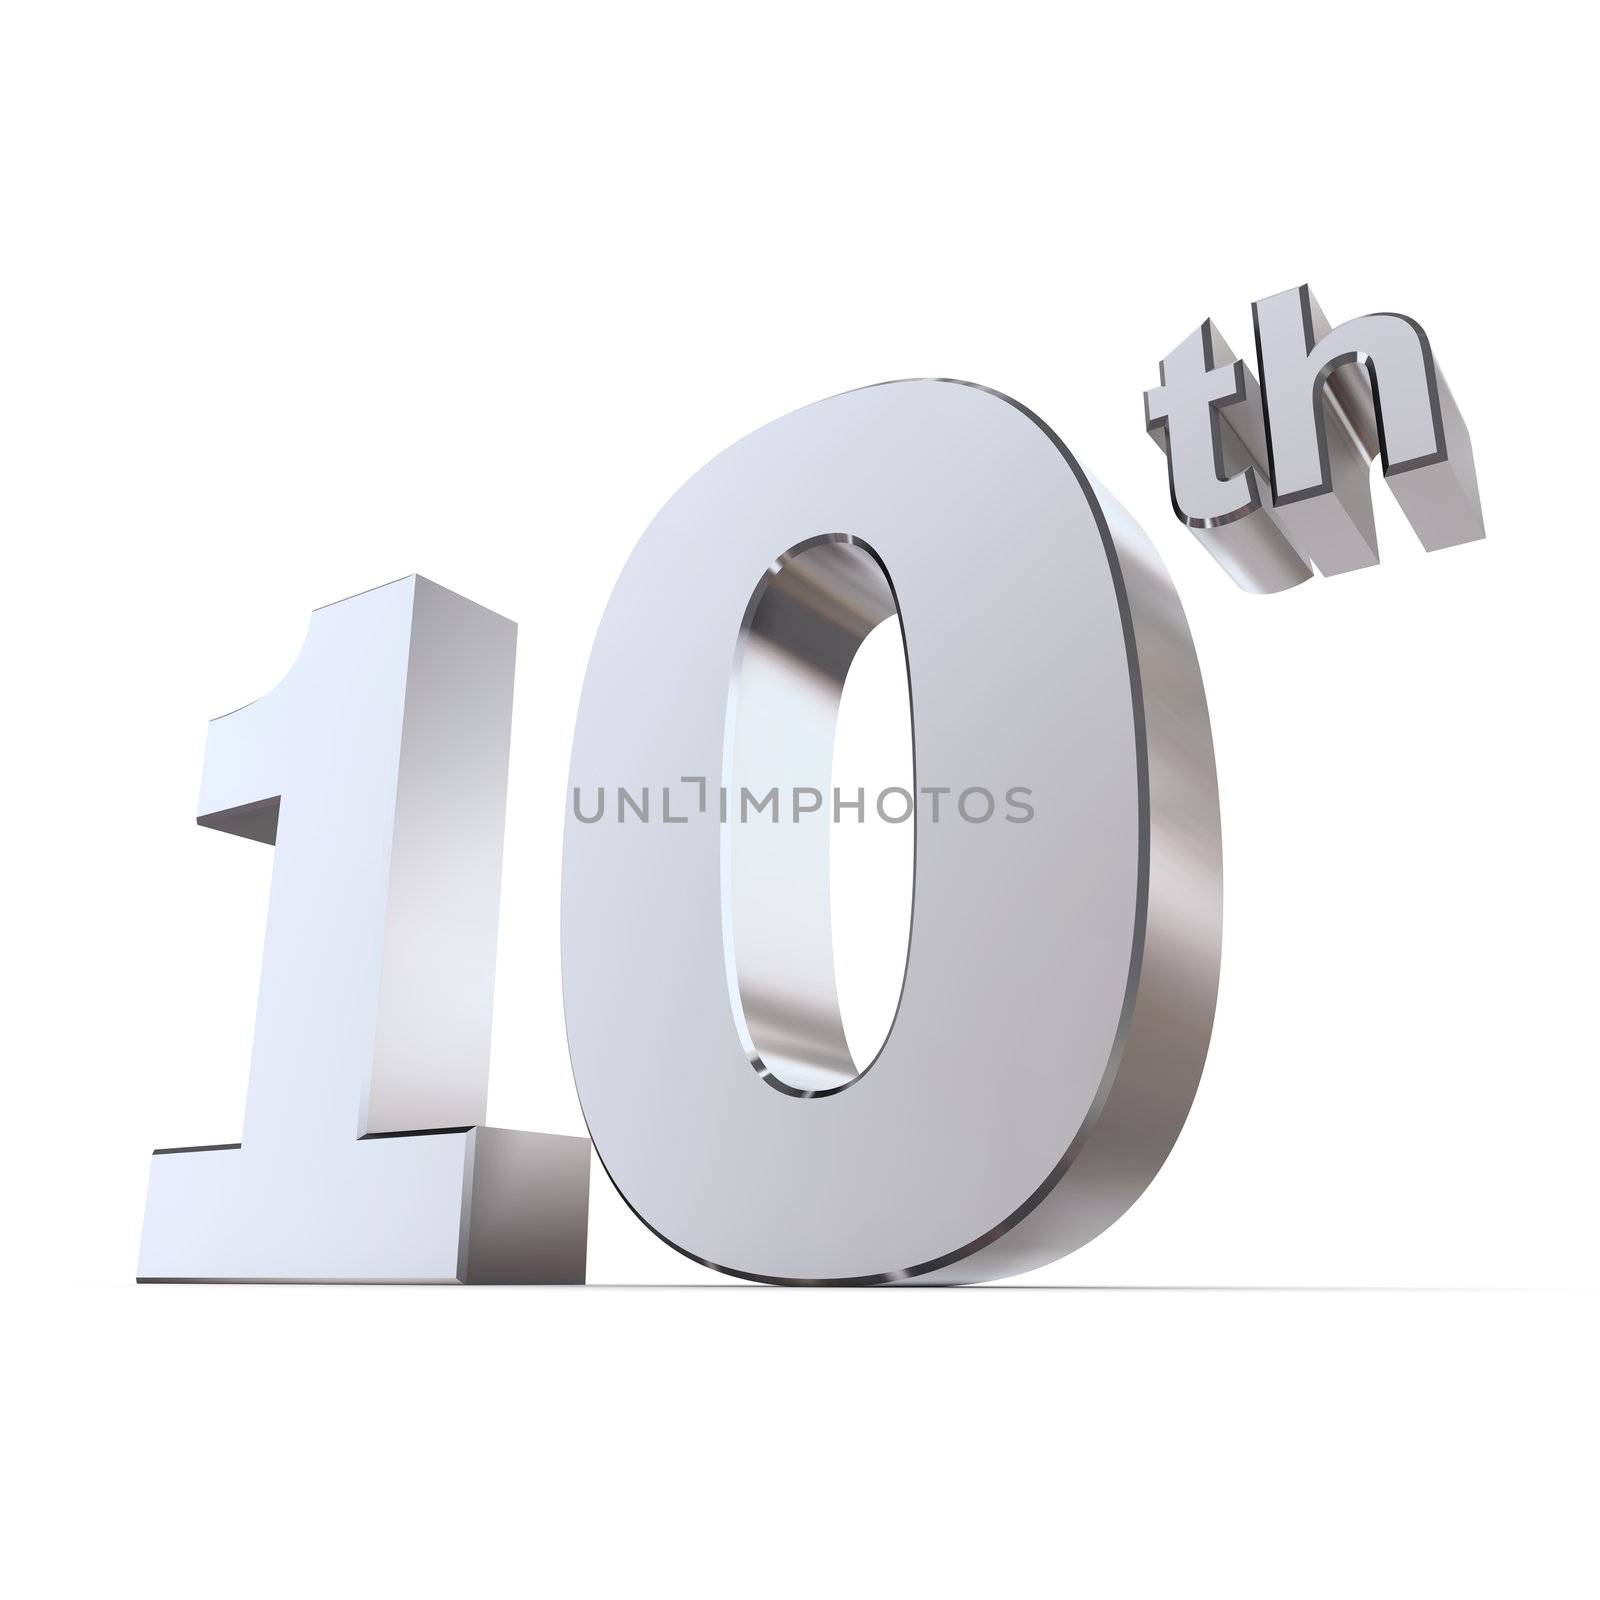 shiny 3d number 10th made of silver/chrome - tin or aluminum wedding anniversary